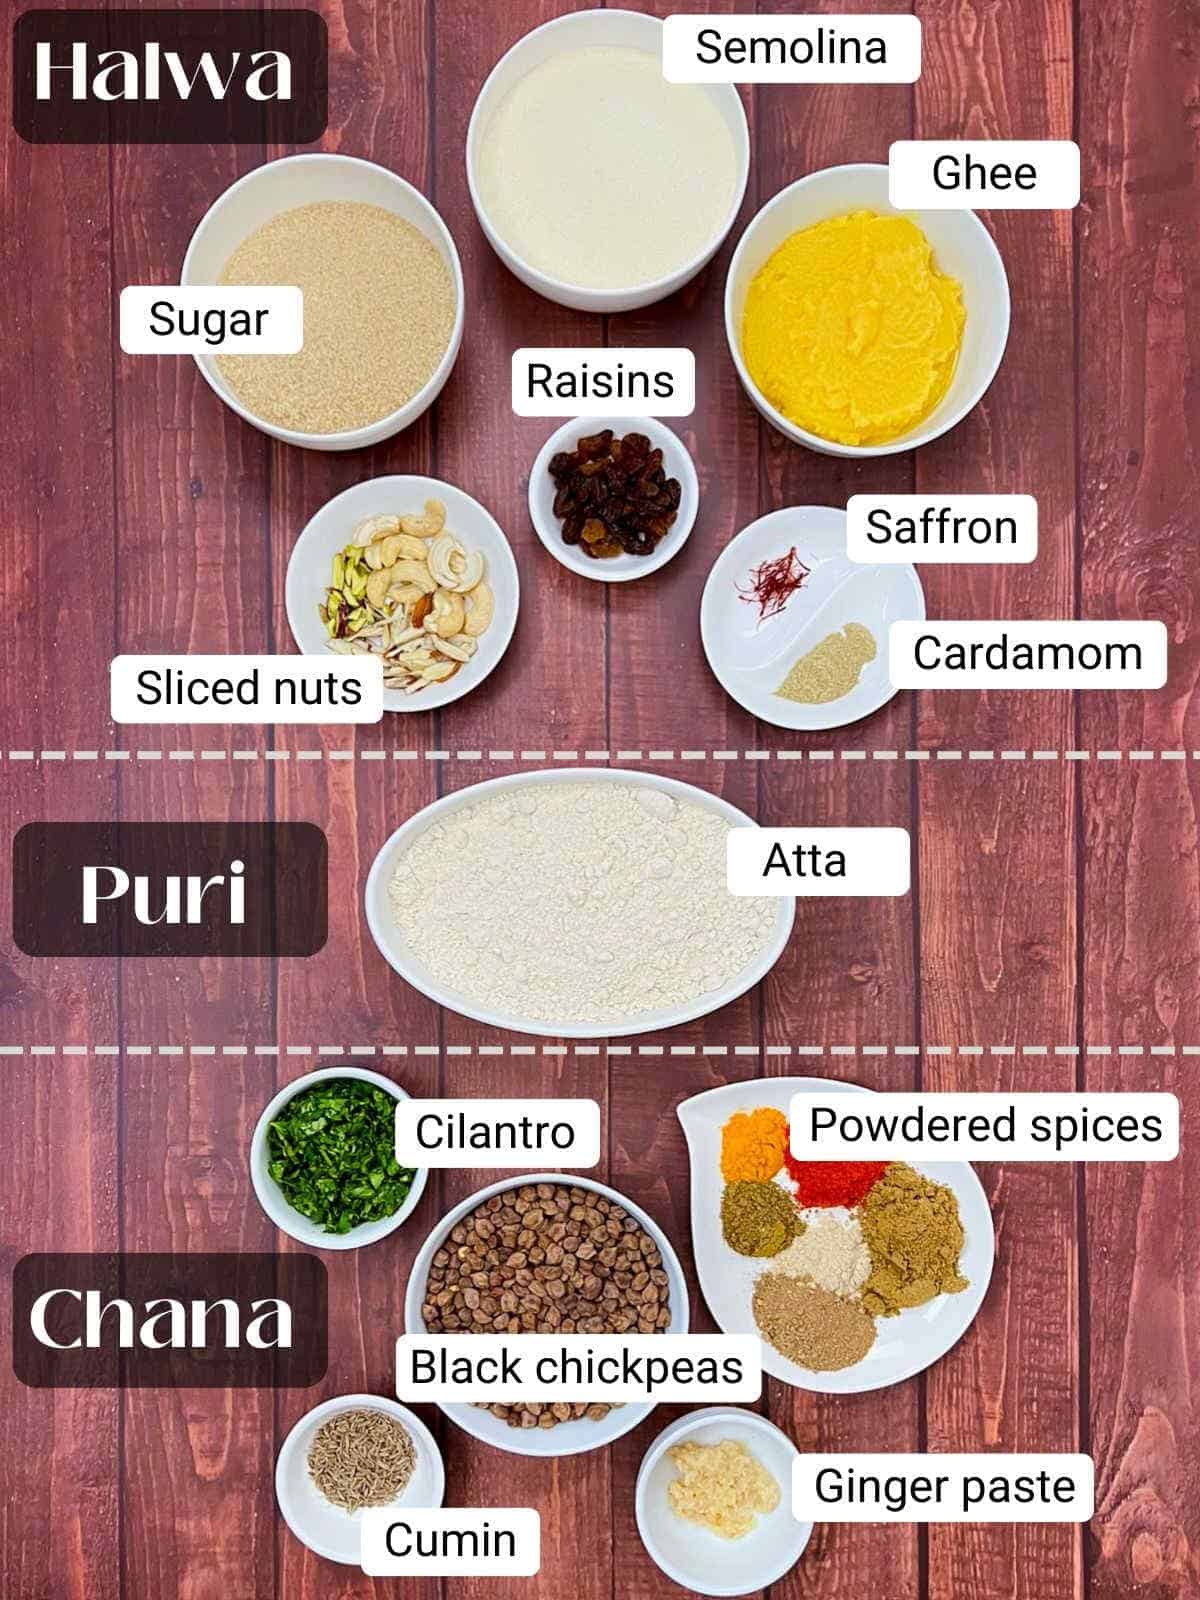 Ingredients to make halwa puri chana placed on a wooden surface.